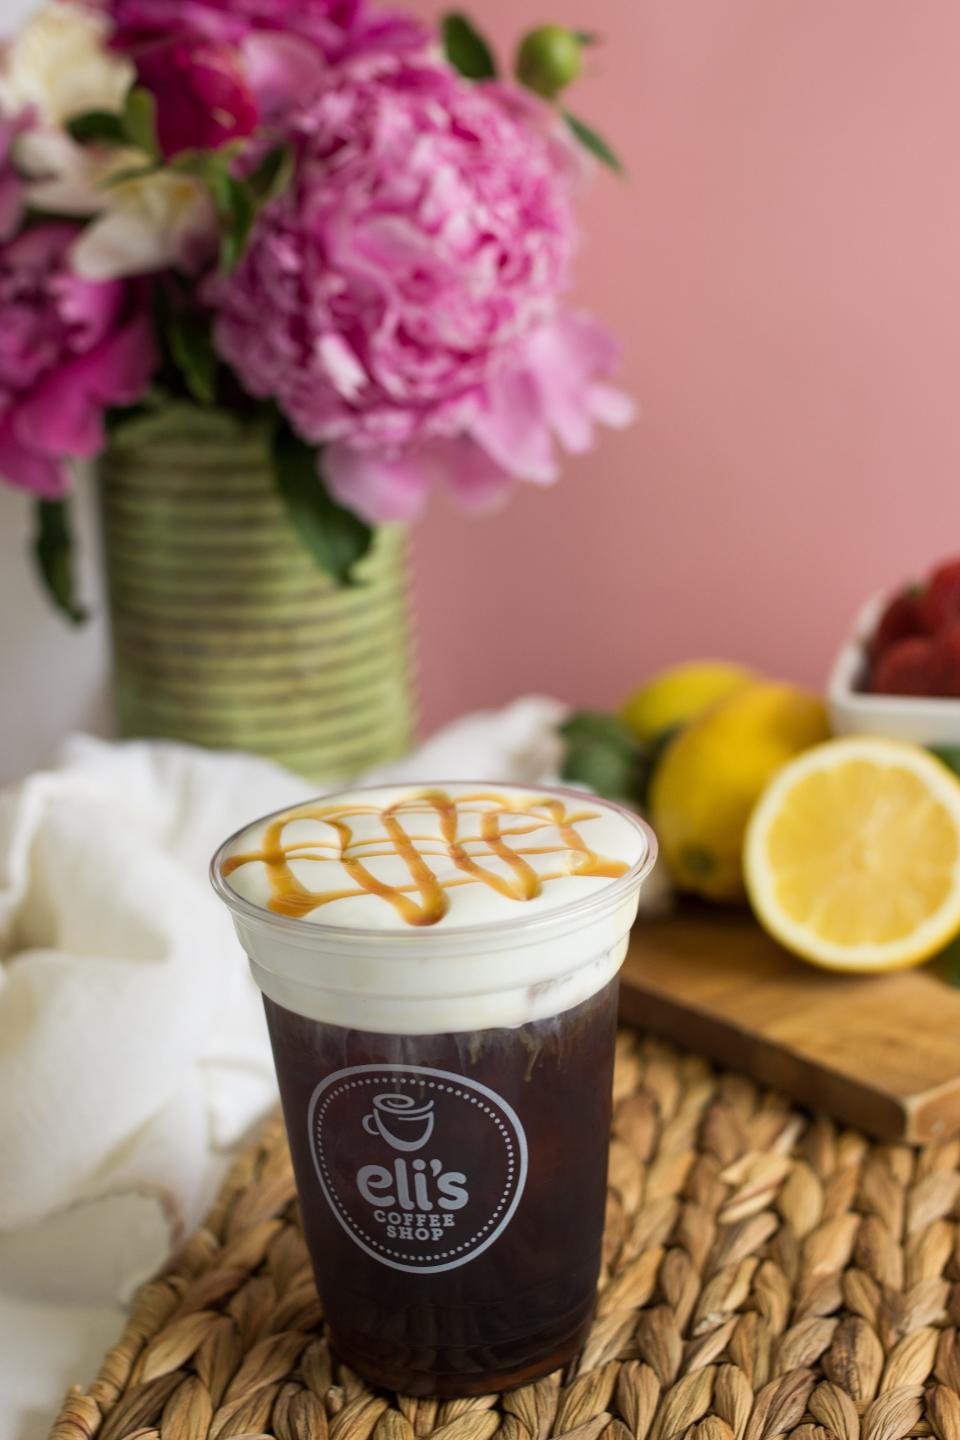 Eli's Coffee Shop announced summer menu options, such as the salty coconut cold brew, in late May.